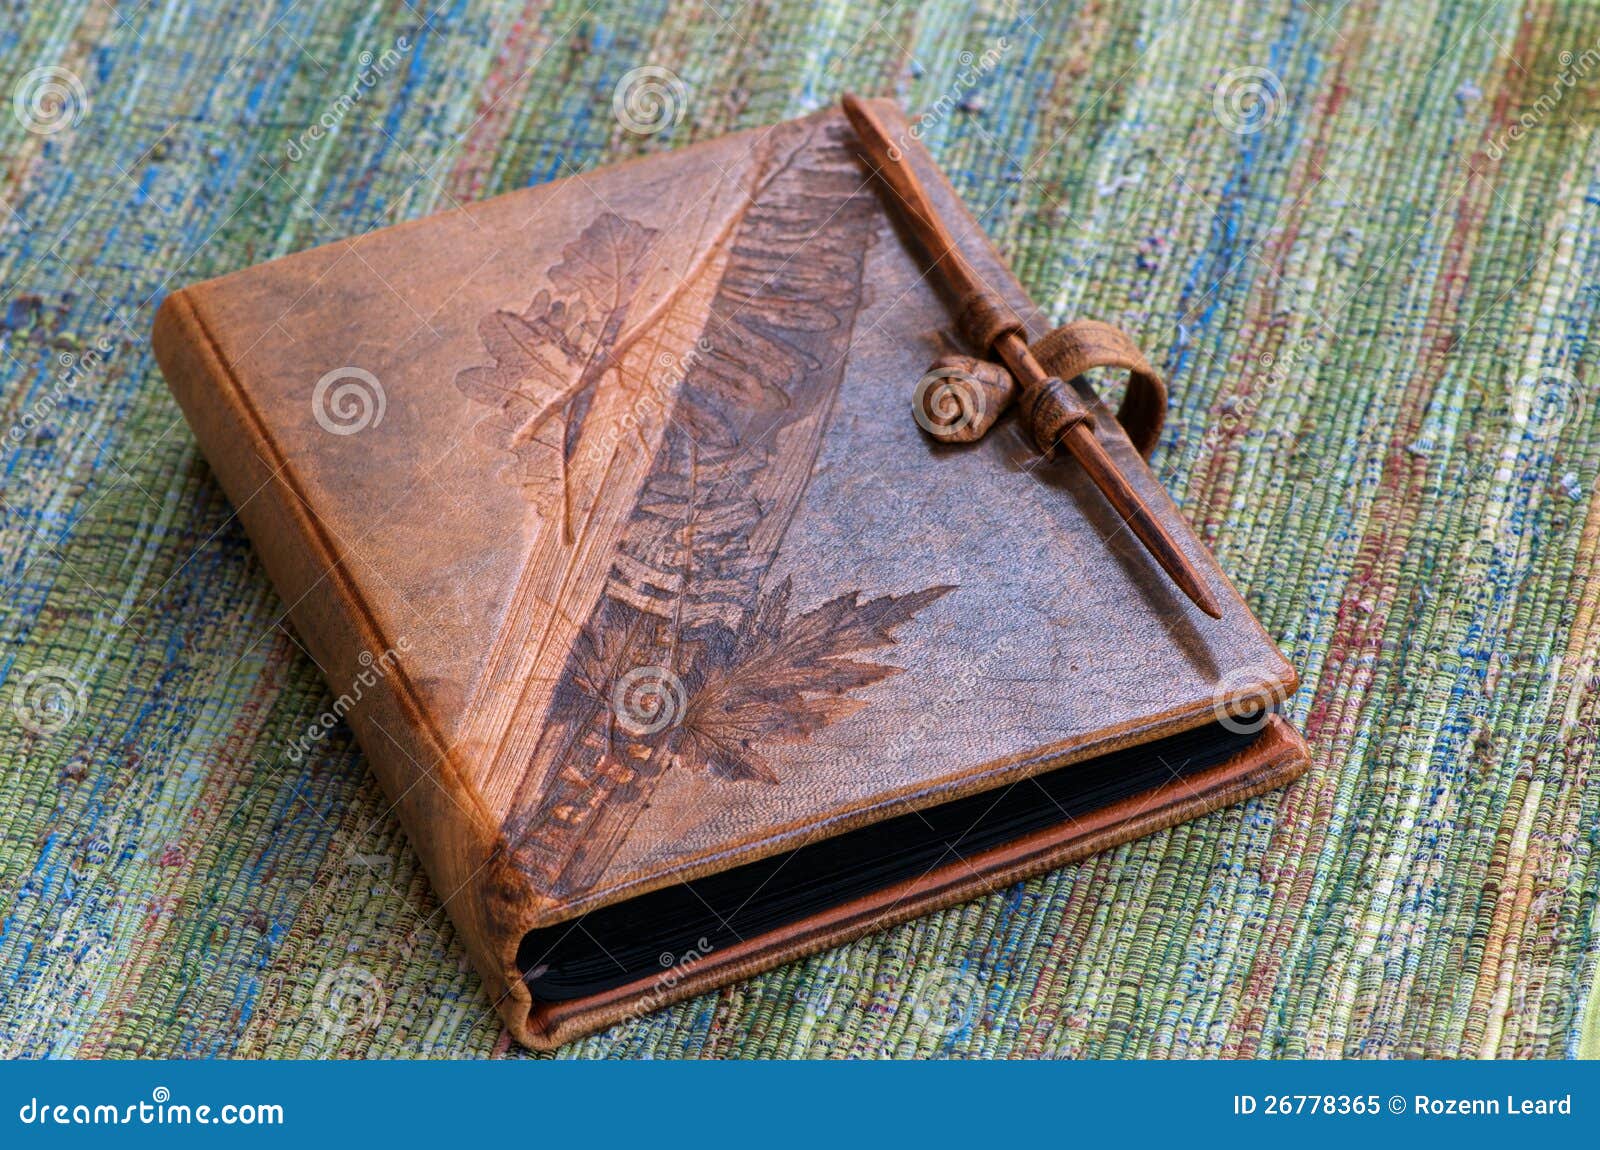 embossed leather book